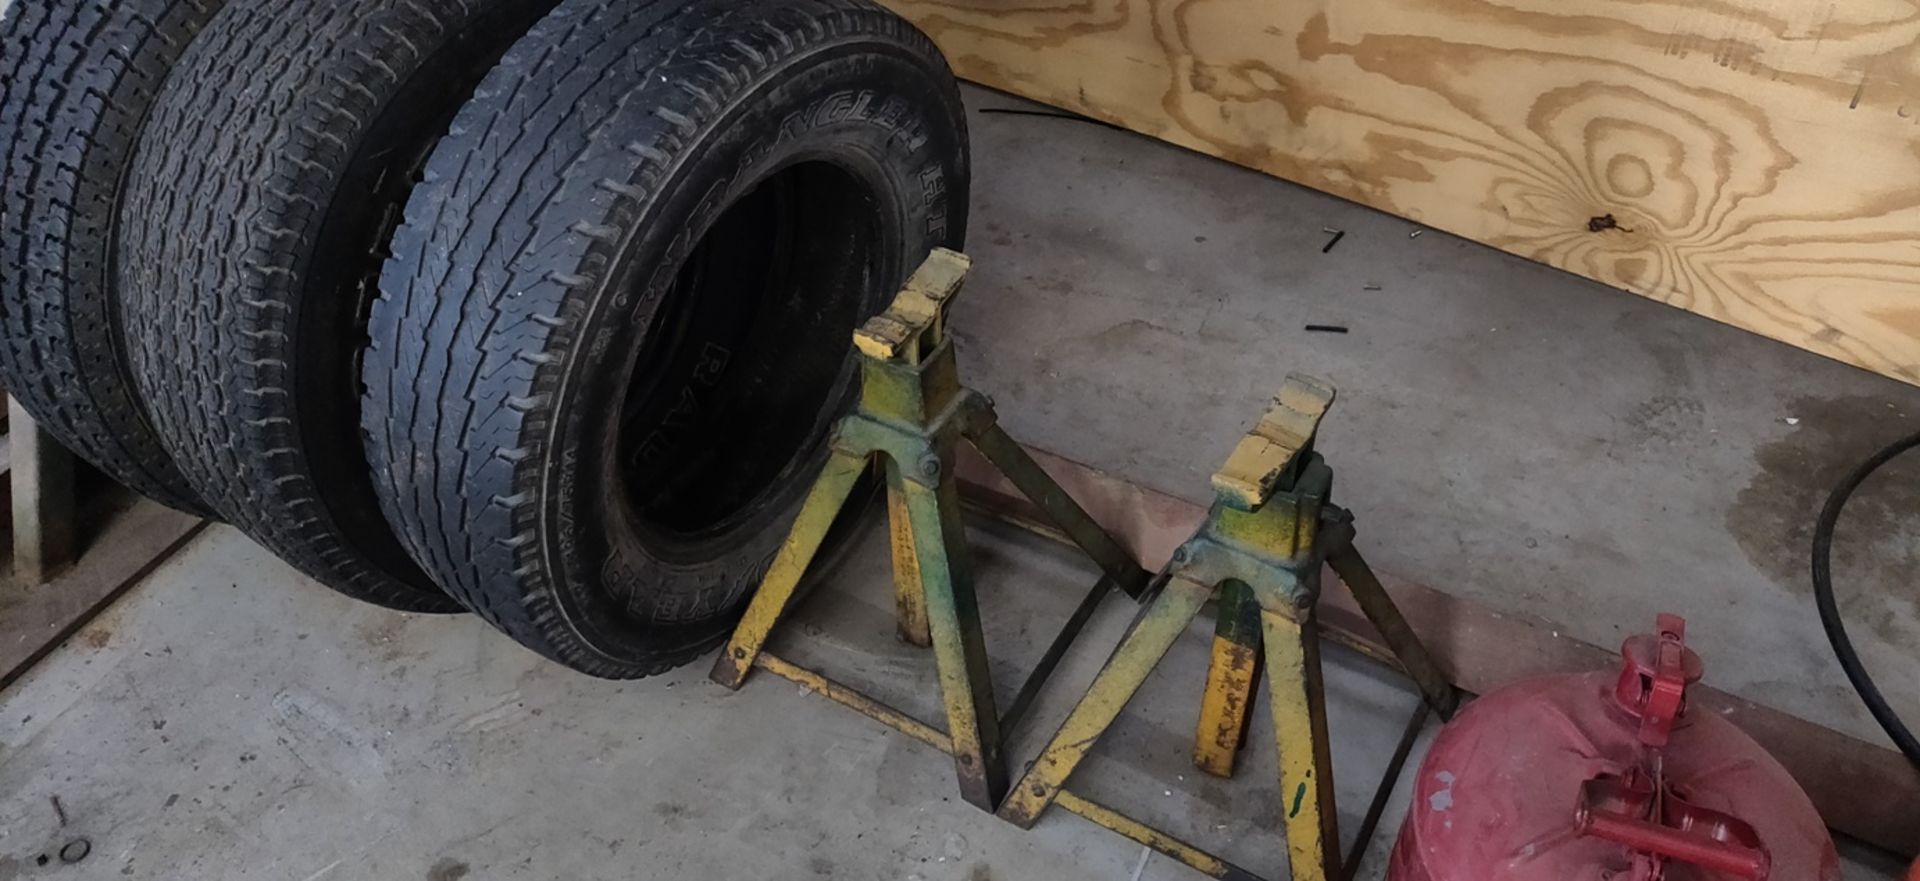 JACK STANDS, GAS TANKS, TIRES, BITS & MISC ITEMS